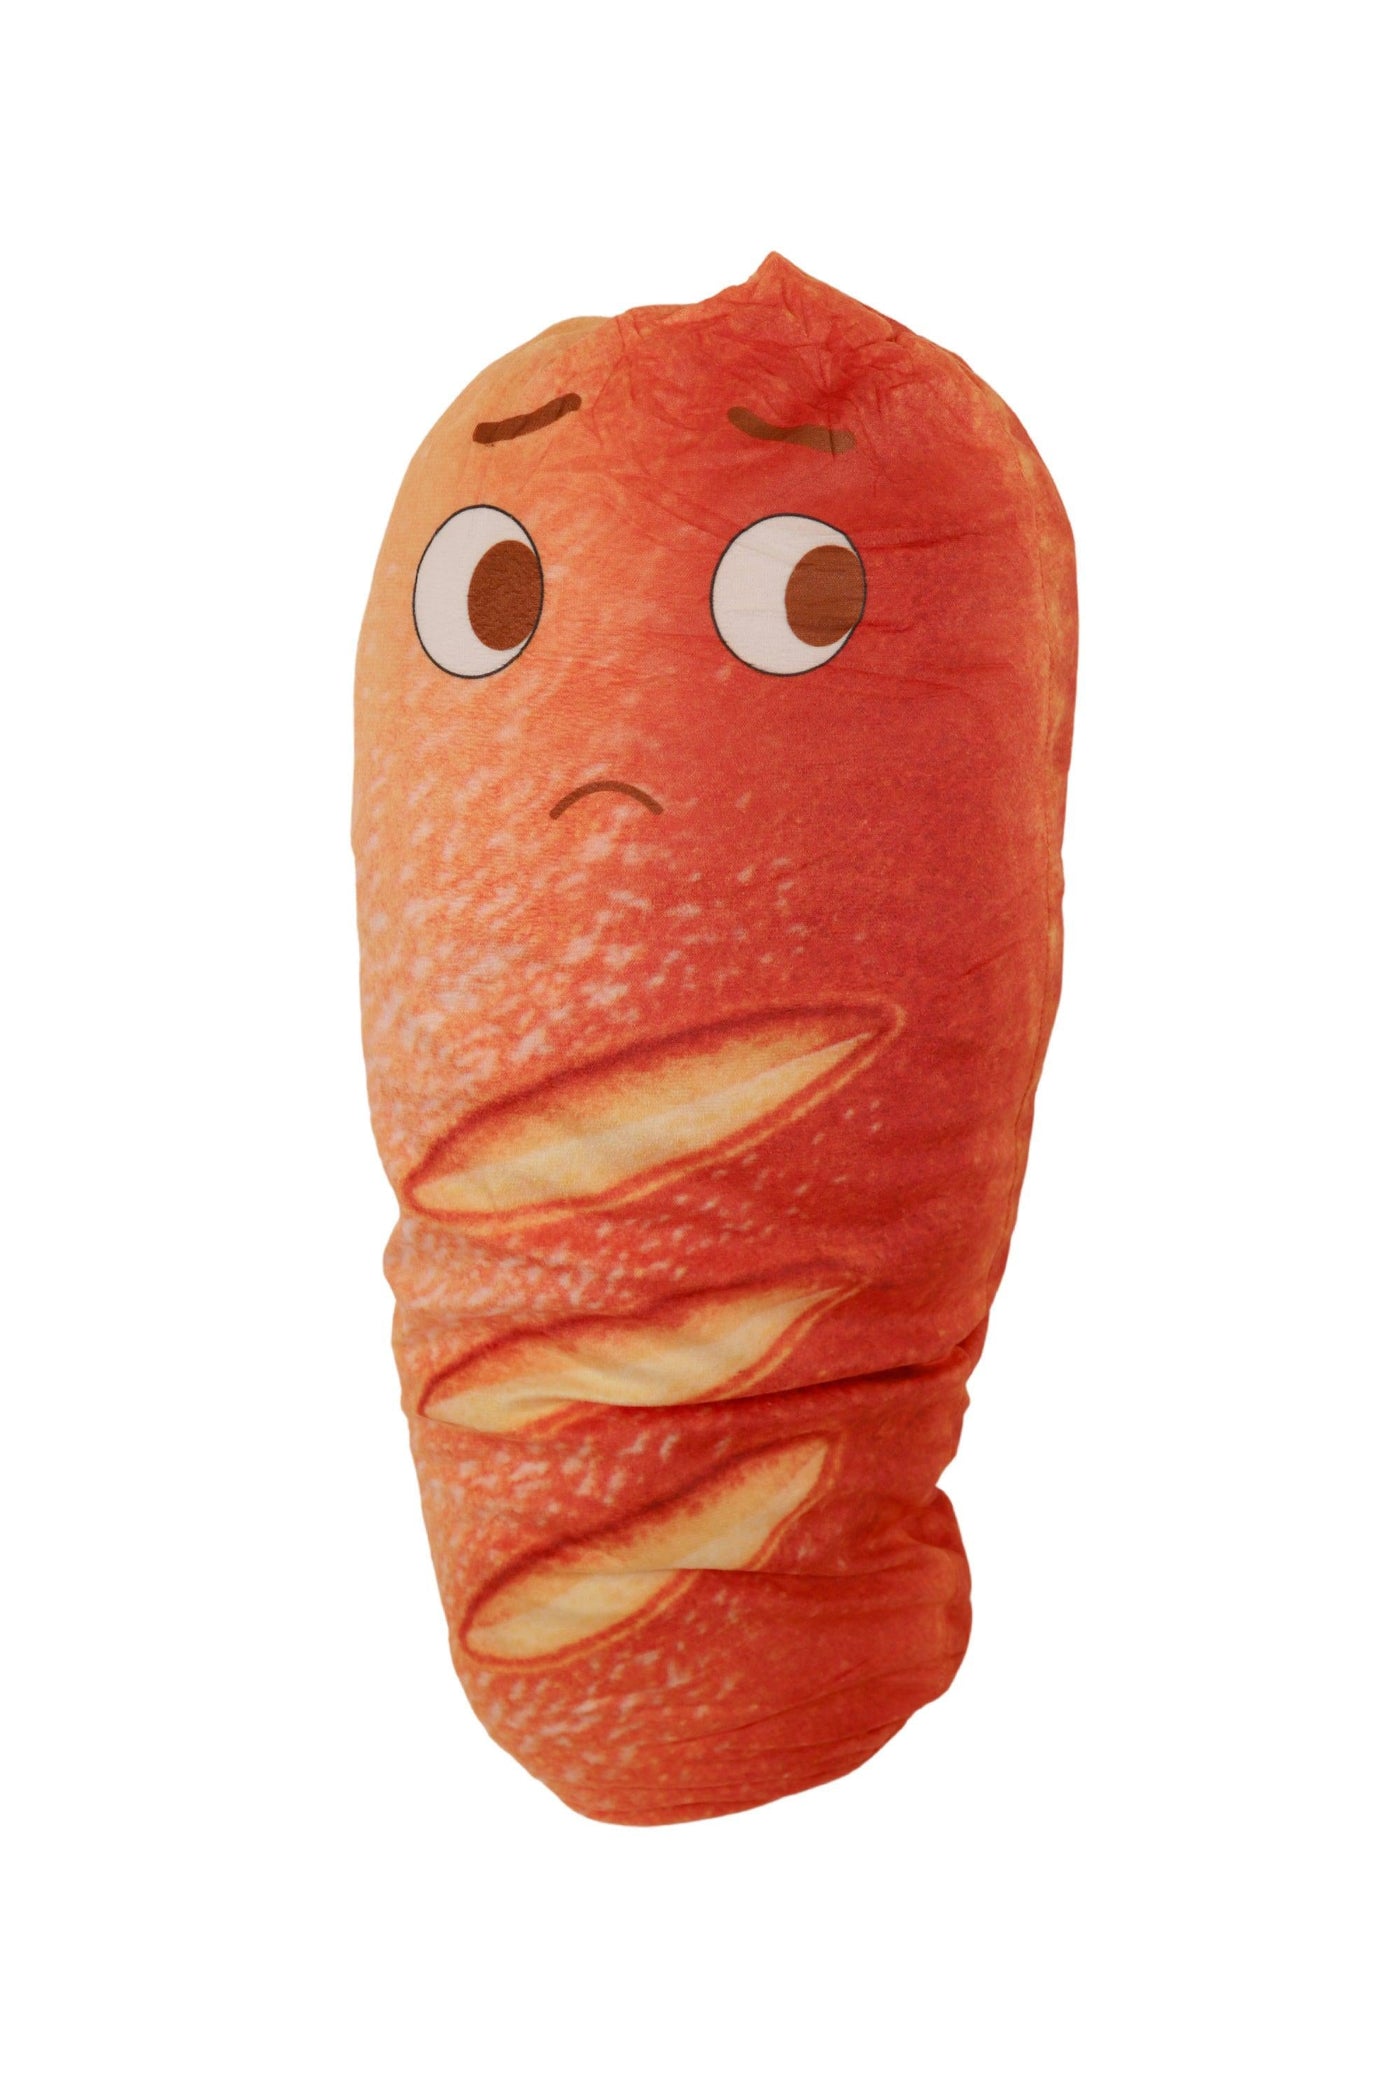 Emotional Bread SAD "M" Size Plushie Toy - 21 Inches Tall/ 7 Inches Wide-Plushie-Zobie Productions-Zobie Productions